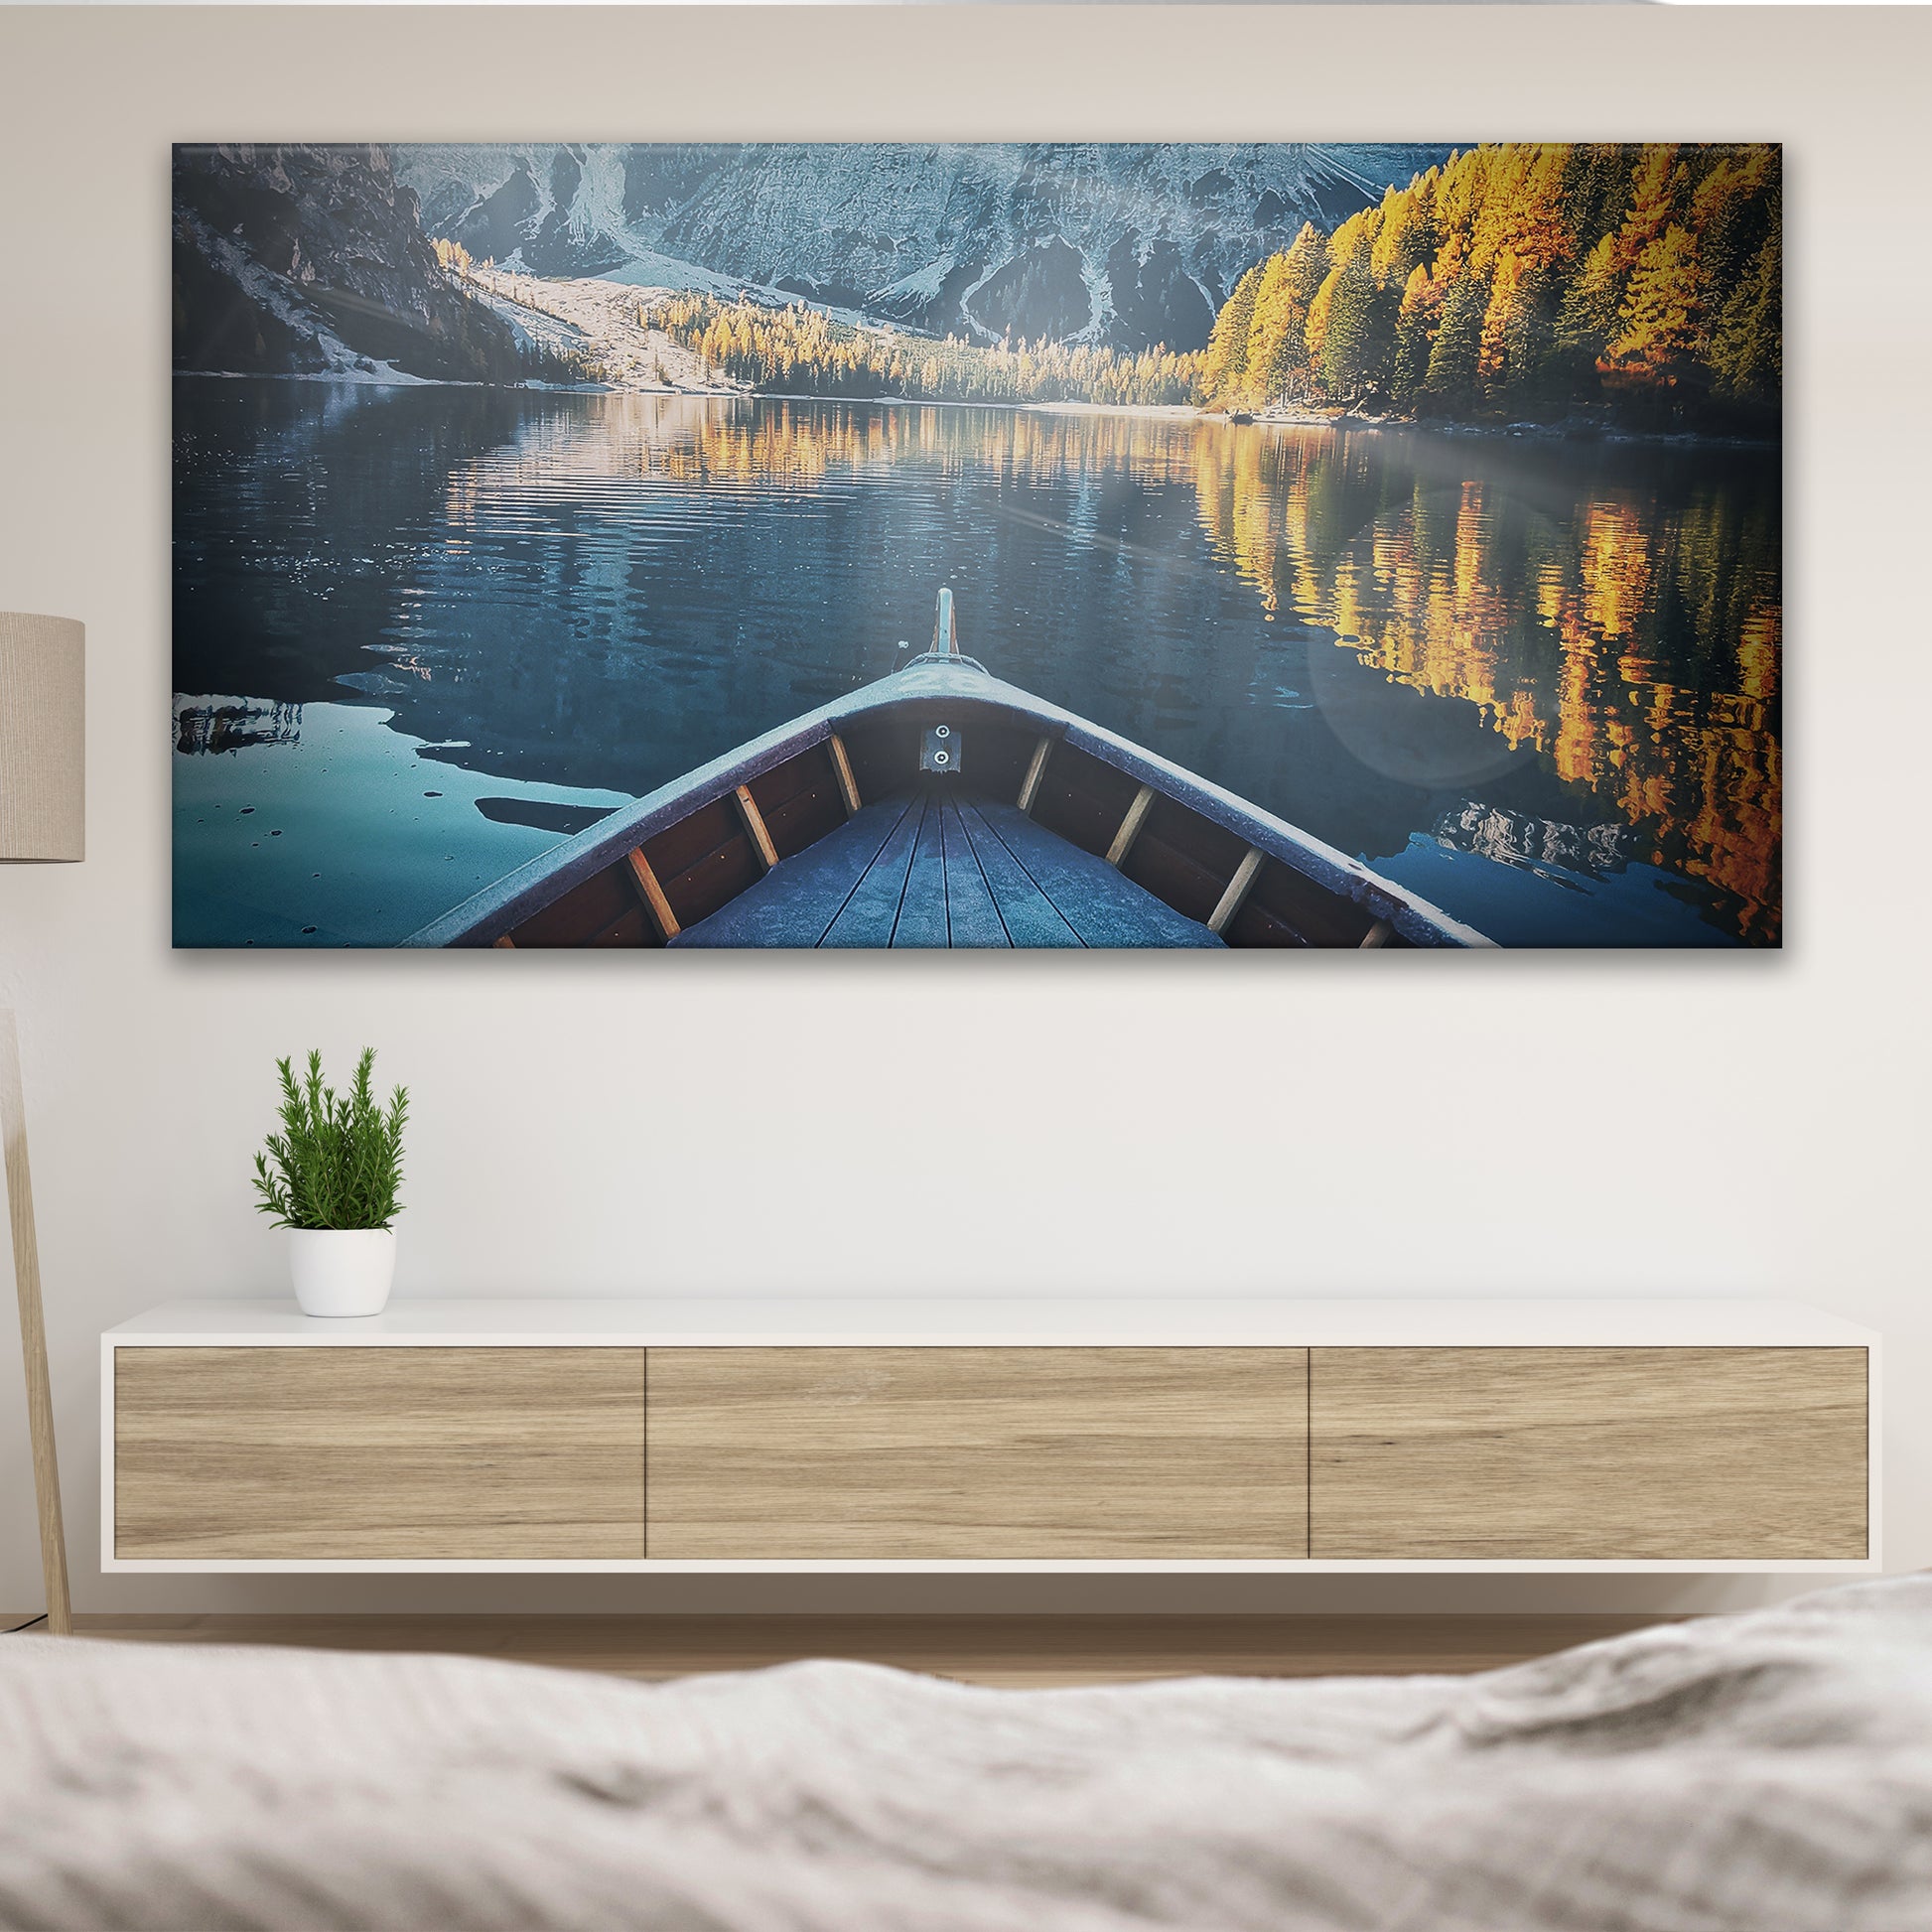 Boat View By The Lake Canvas Wall Art - Image by Tailored Canvases